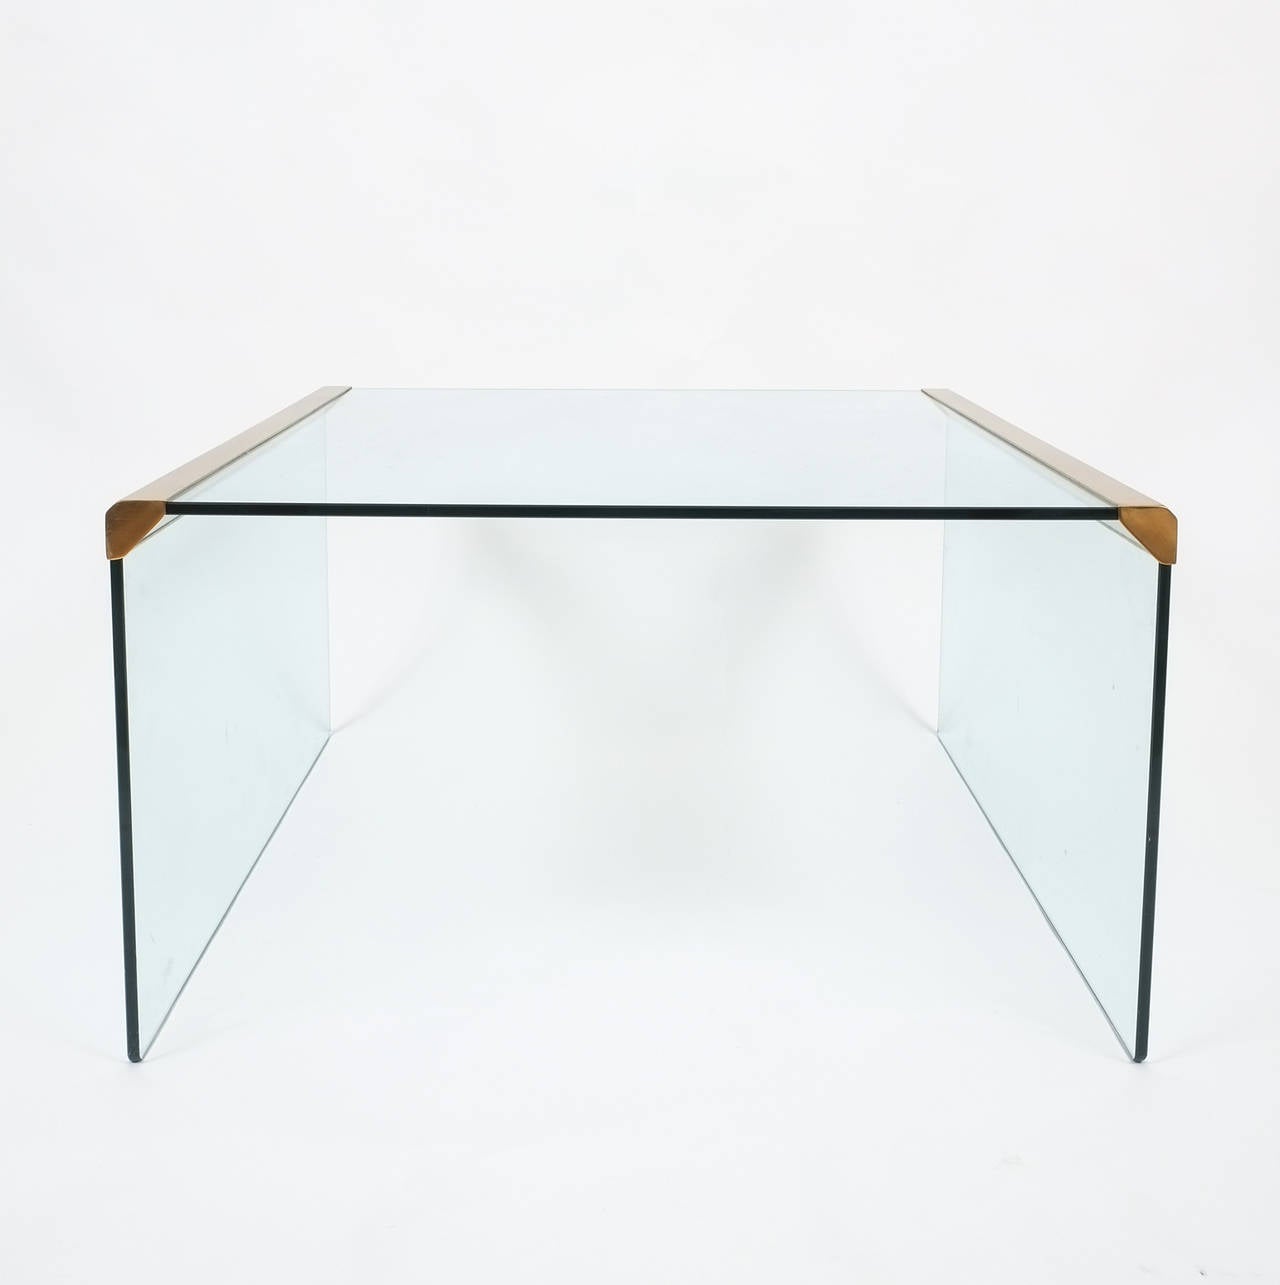 Late 20th Century Italian Clear Glass Coffee Table by Pierangelo Galotti for Galotti & Radice, 1970 For Sale